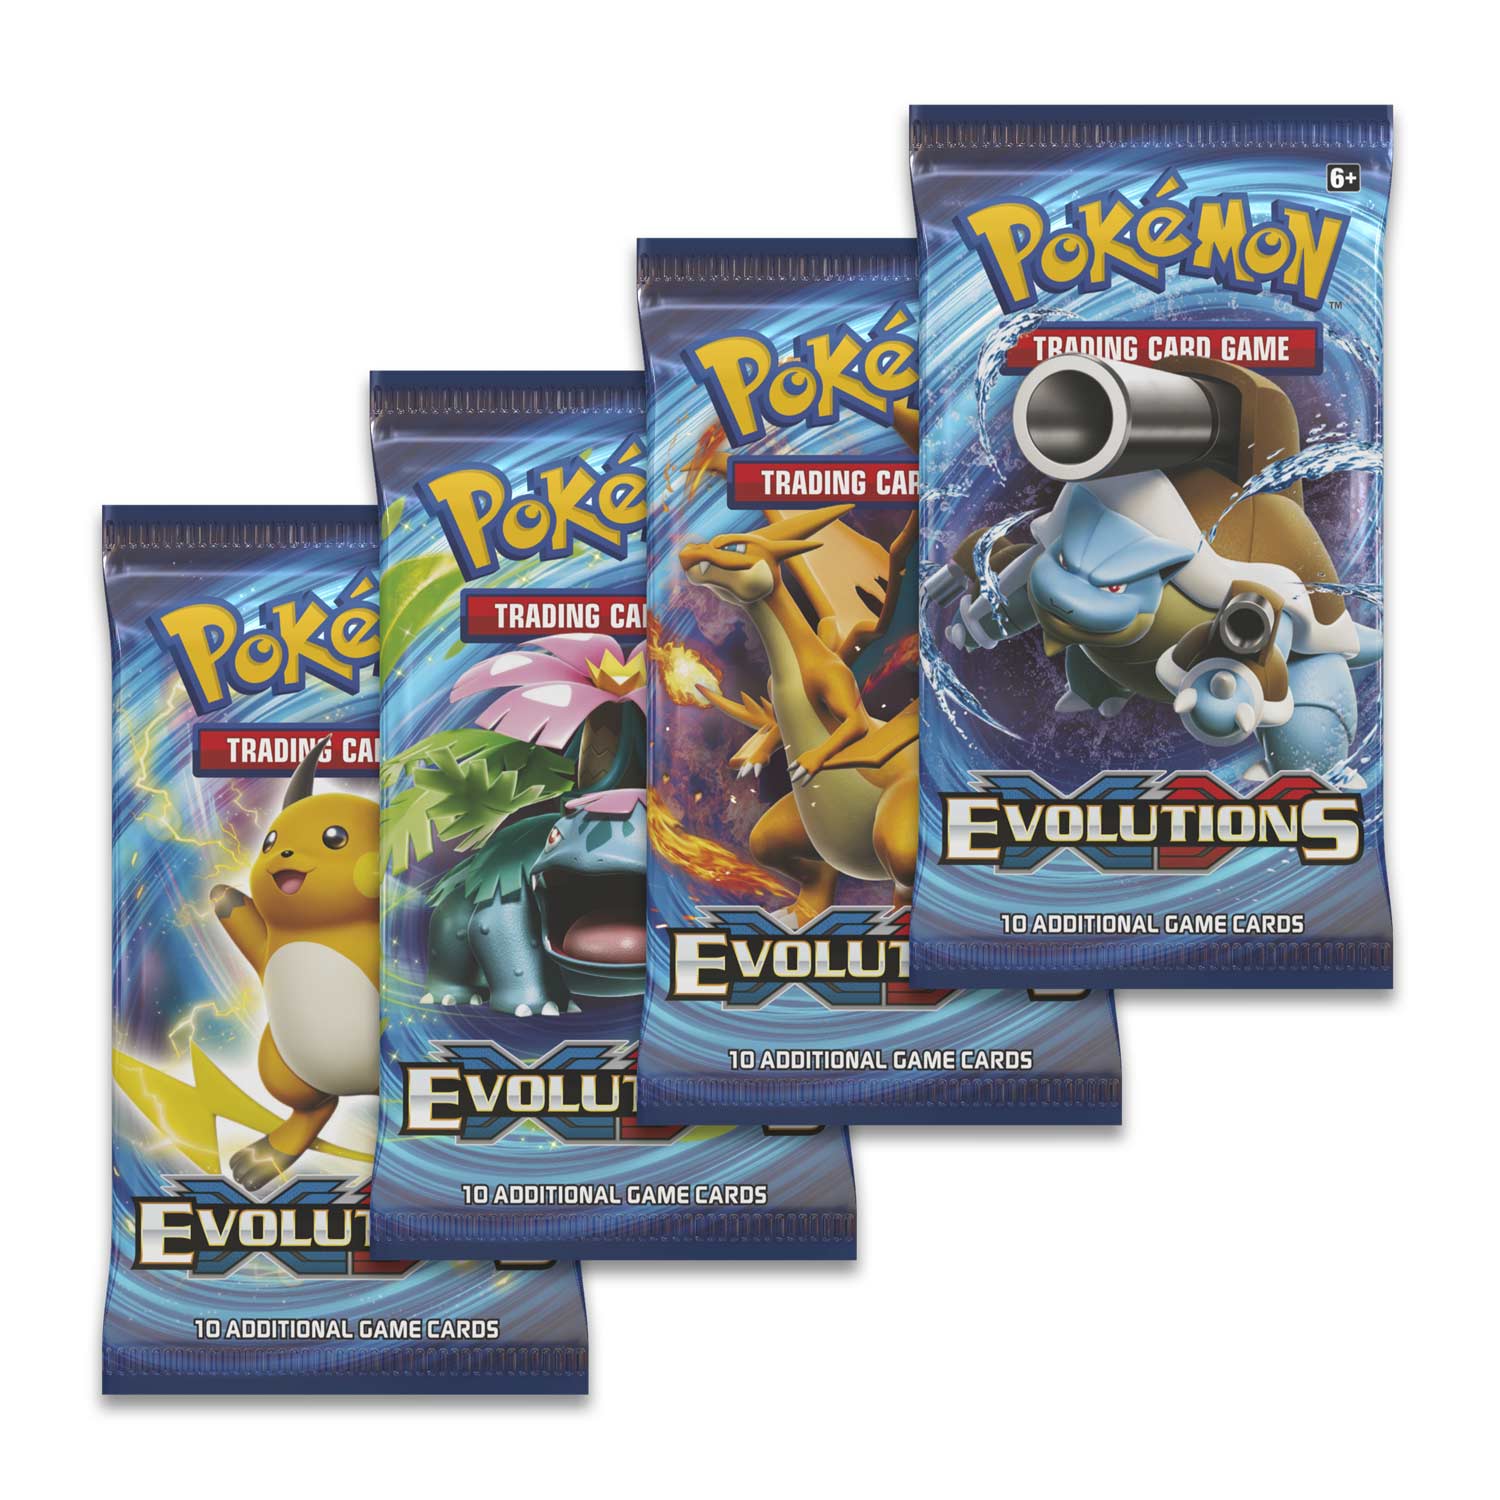 ORIGINAL and SEALED all artworks Pokemon XY Evolution Booster-ENGLISH 